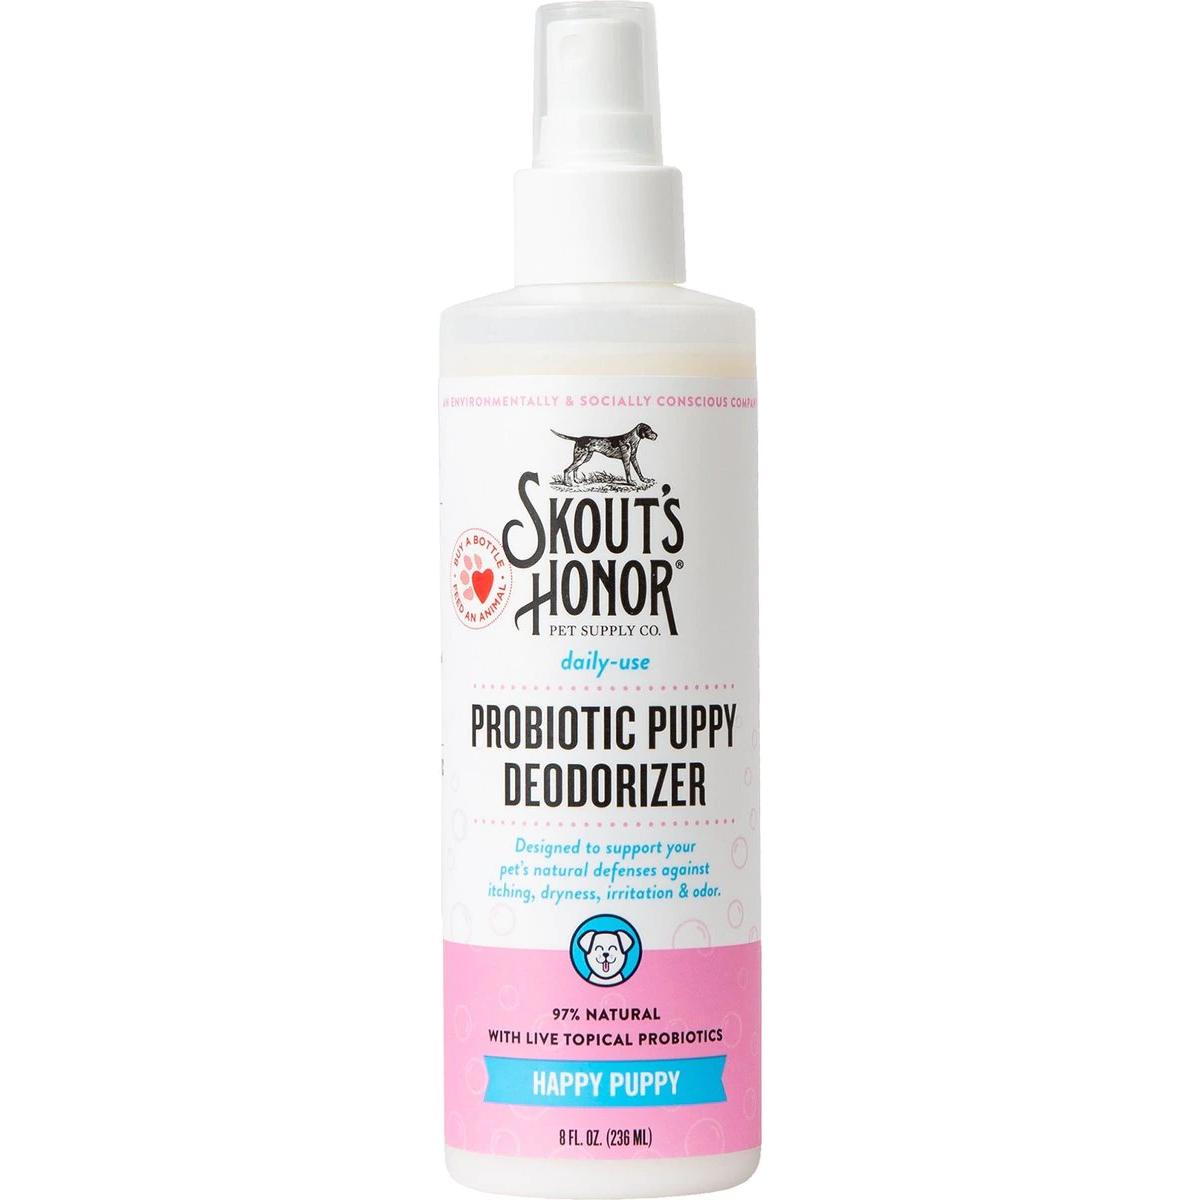 Skout's Honor Happy Puppy Probiotic Daily Use Cat & Dog Deodorizing Spray